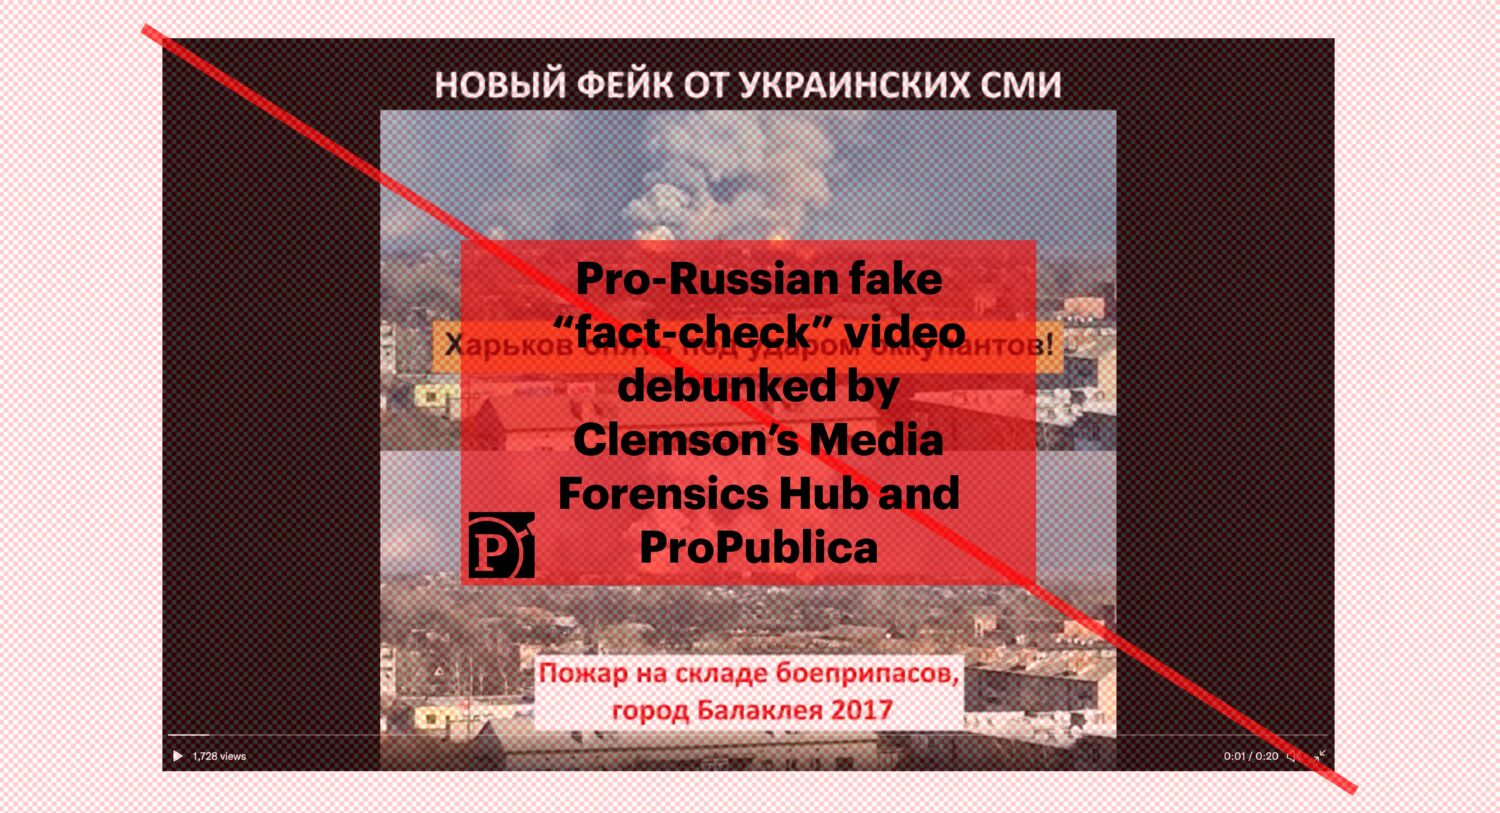 Stills from a Russian-language video that falsely claims to fact-check Ukrainian disinformation. There’s no evidence the video was created by Ukrainian media or circulated anywhere, but the label at the top says the video is a “New Fake from Ukrainian media.” The central caption inaccurately labels the footage as “Kharkiv is again under attack by the occupants!” falsely attributing the claim to Ukrainian media. The lower caption correctly identifies the event as “Fire at the ammunition depot, the city of Balakliya, 2017.” 